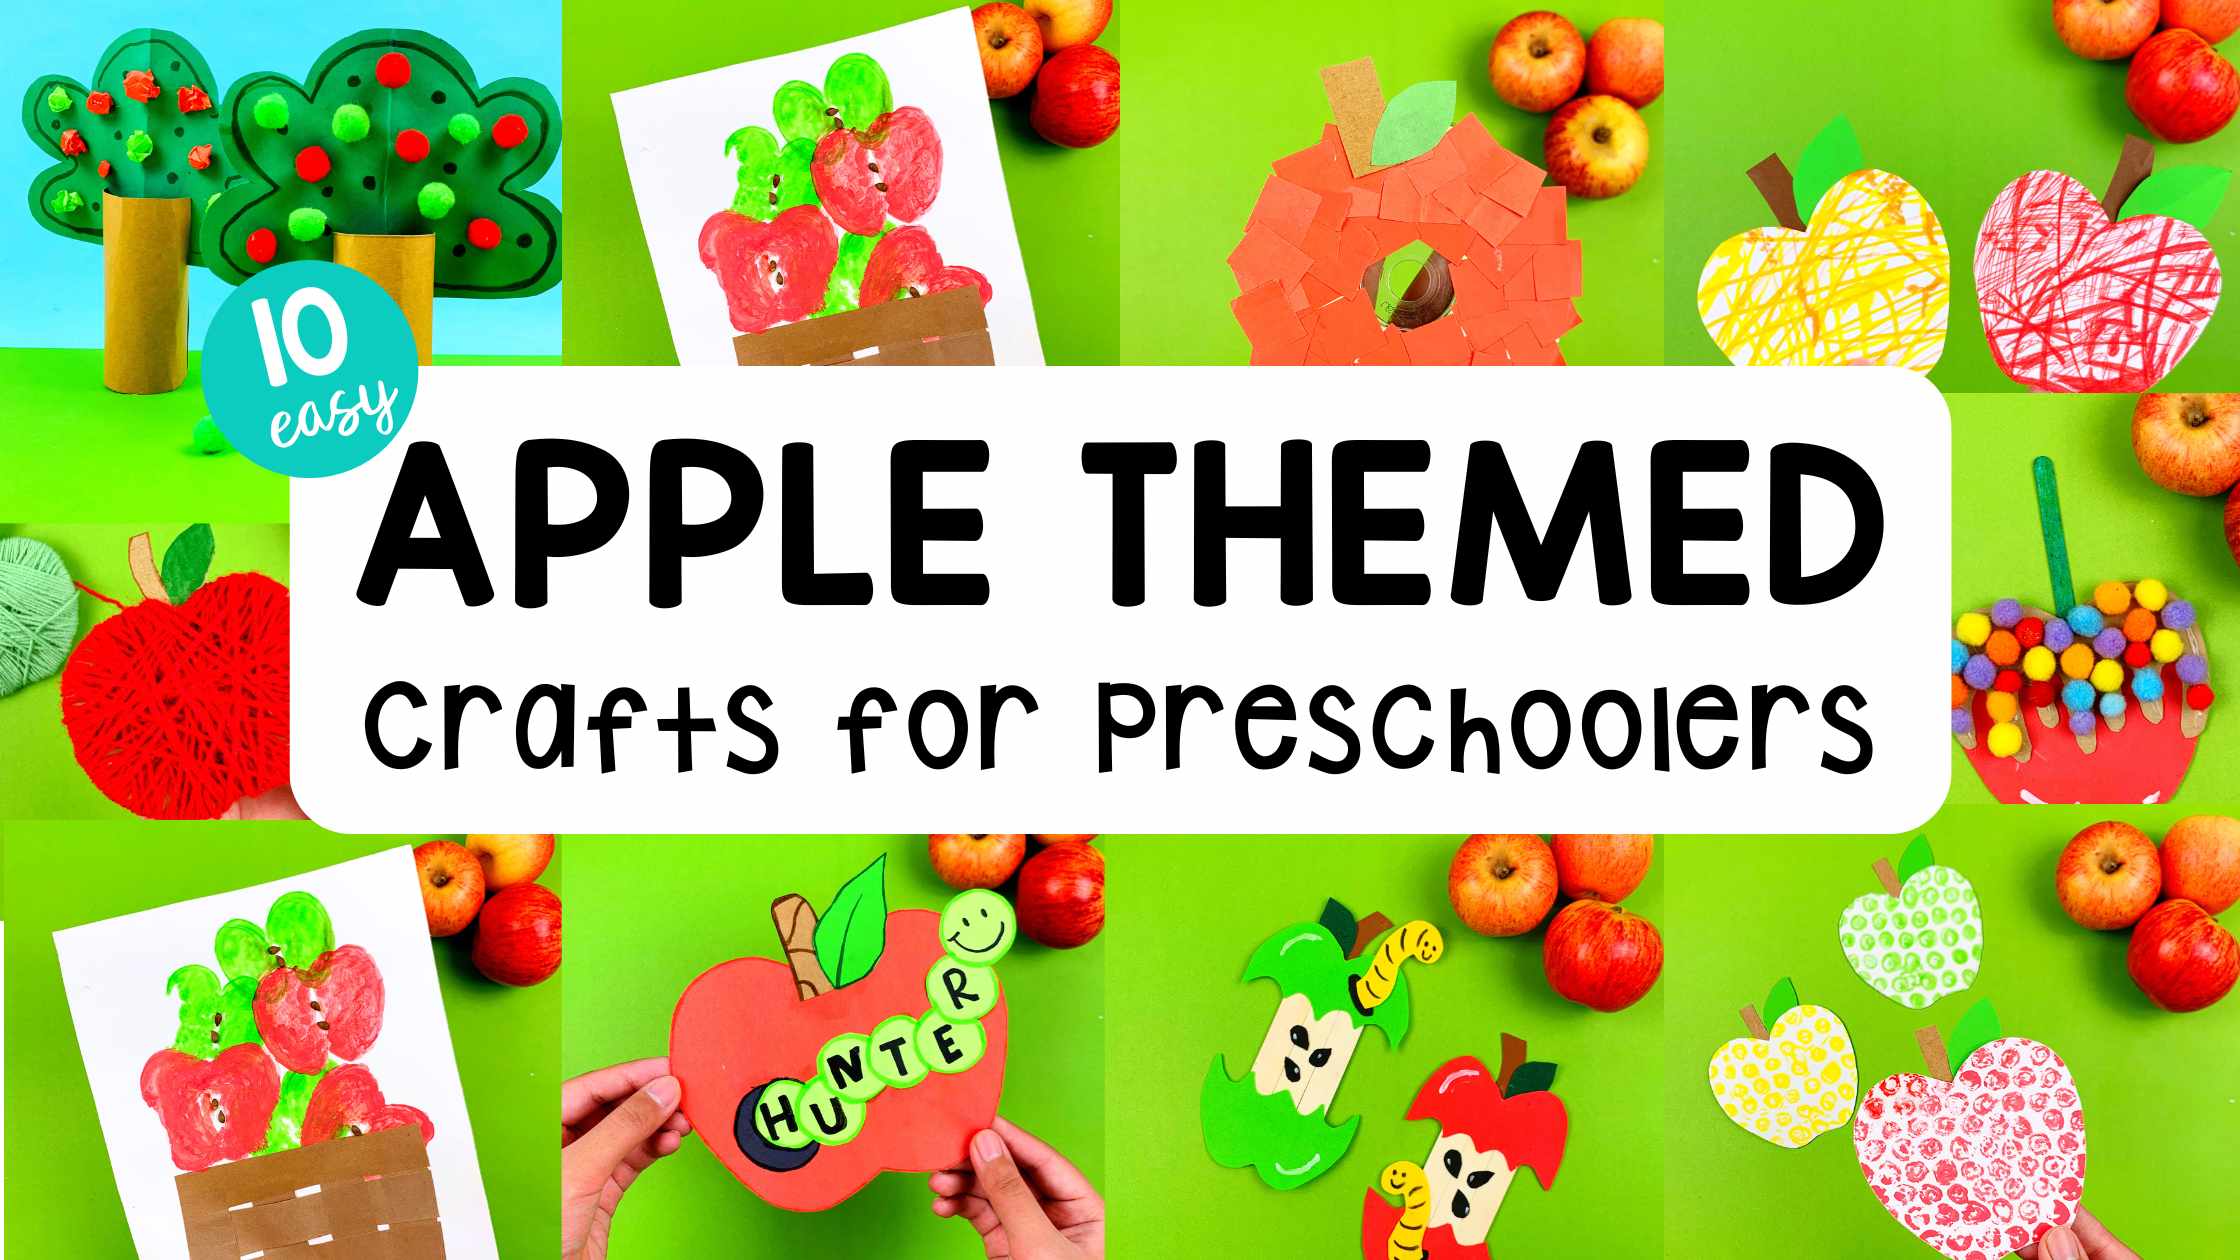 10 Easy Apple-Themed Crafts for Preschoolers